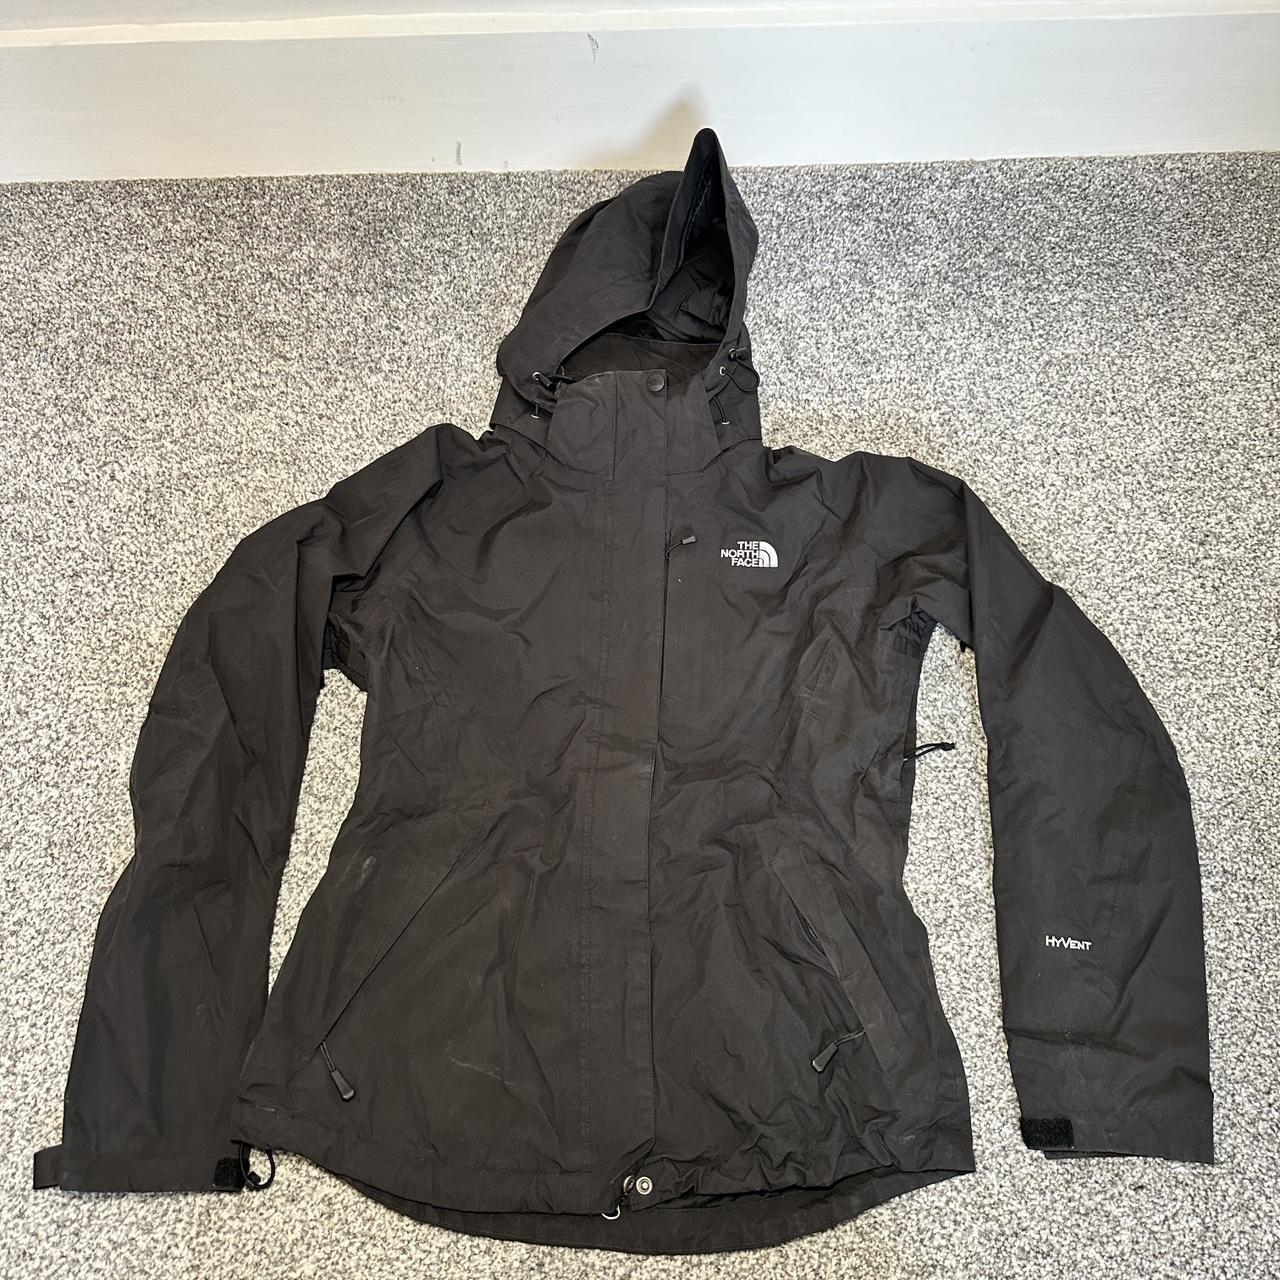 The North Face Goretex Women’s Jacket in Black size... - Depop